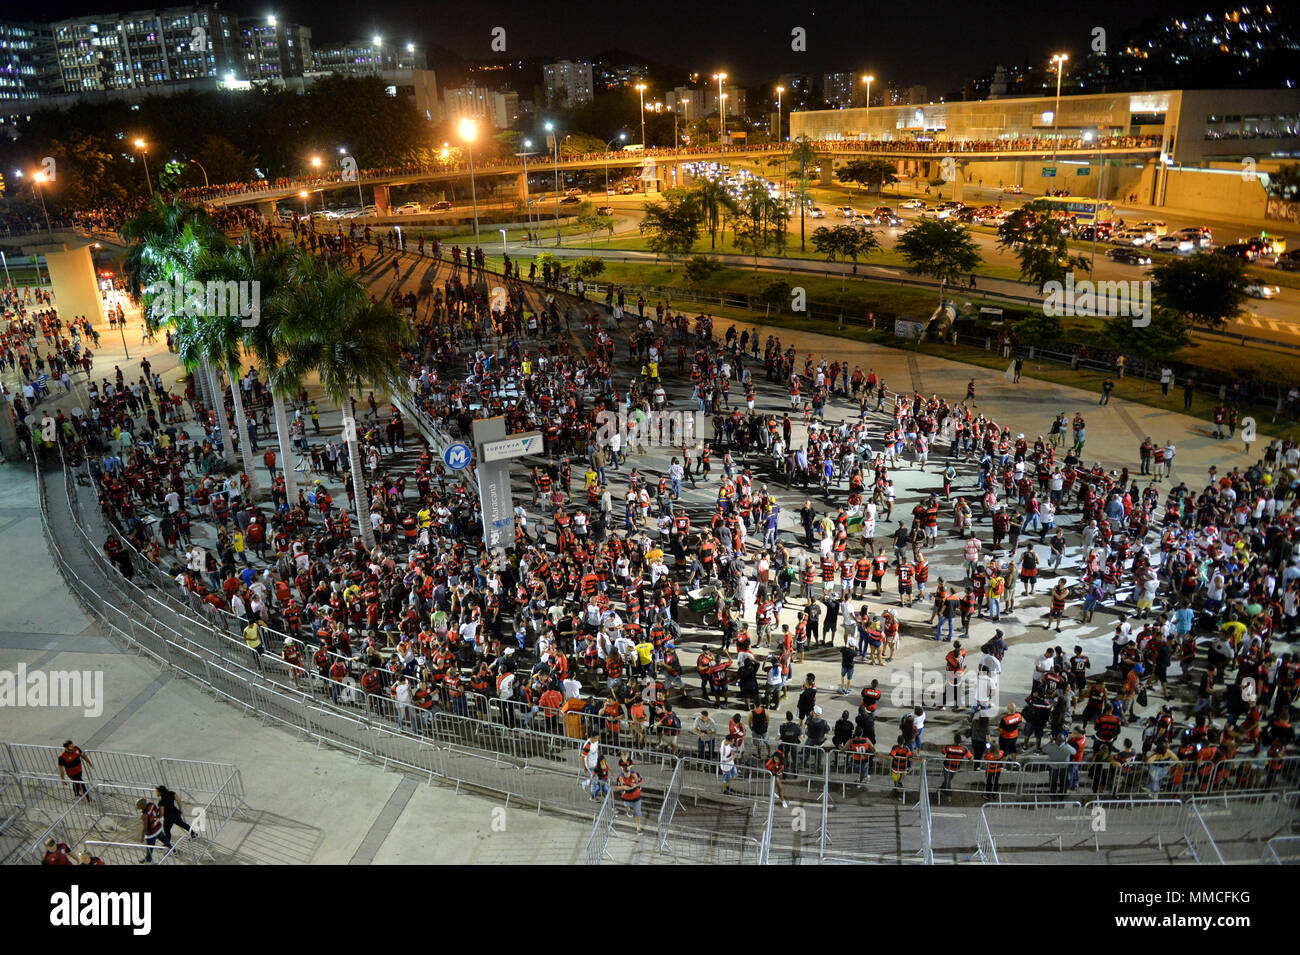 Rio De Janeiro, Brazil. 10th May, 2018. Arrival of the fans on the subway ramp during Flamengo vs. Ponte Preta held in Maracanã for the Eighth Finals of the Brazil Cup in Rio de Janeiro, RJ. Credit: Celso Pupo/FotoArena/Alamy Live News Stock Photo